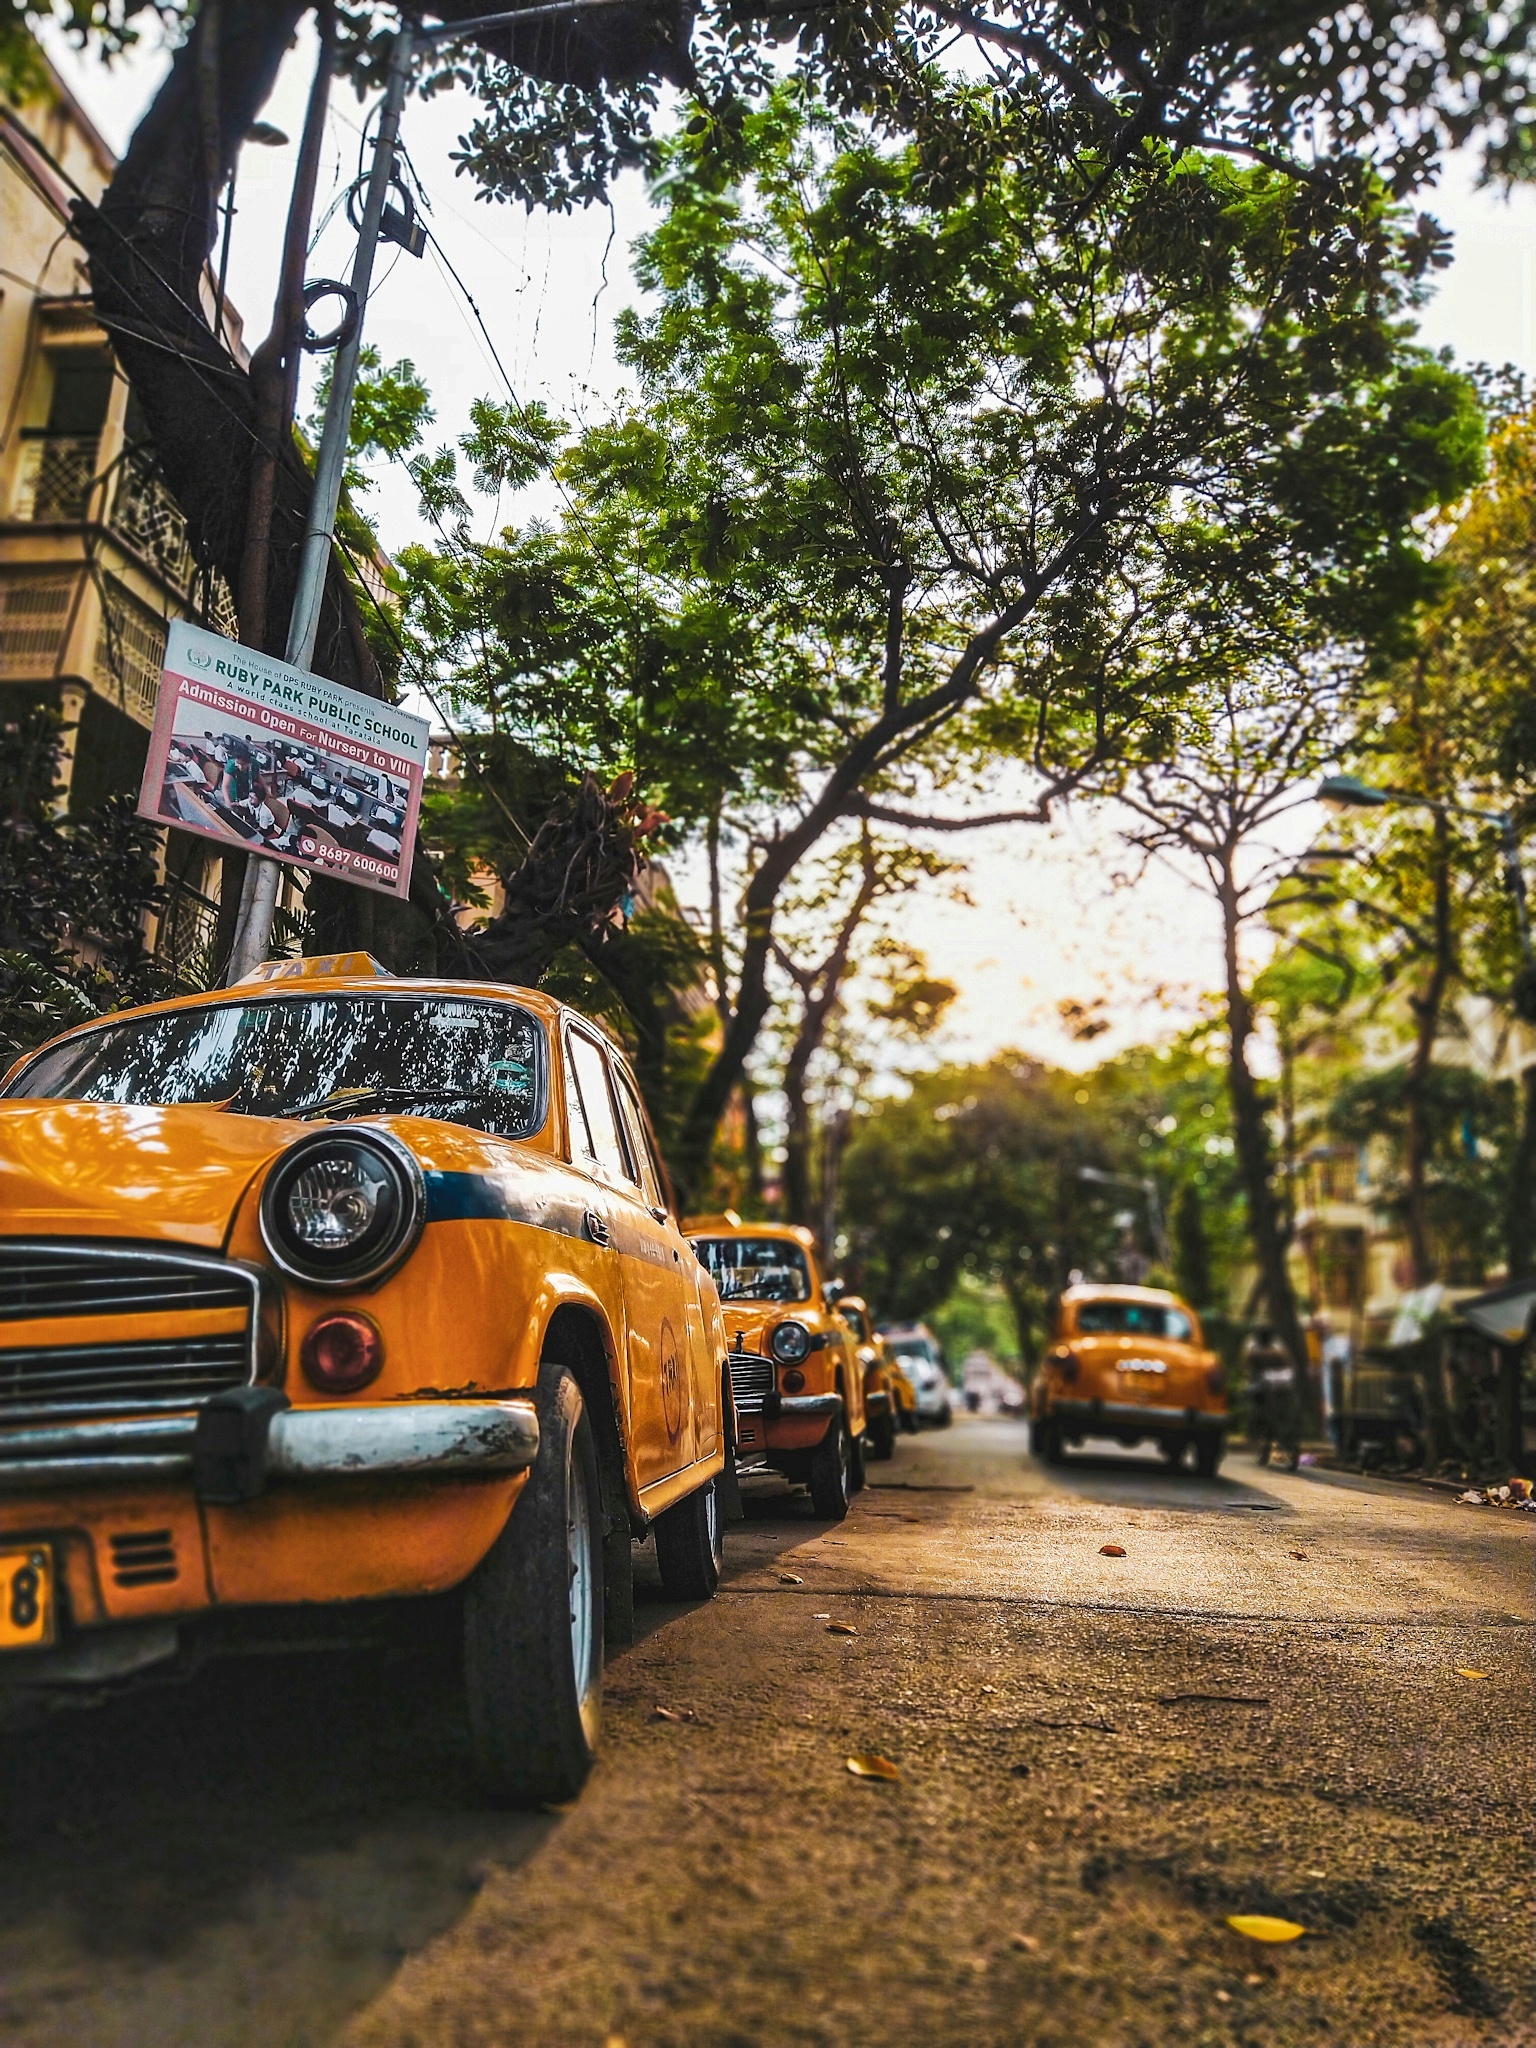 Taxi stand of a city